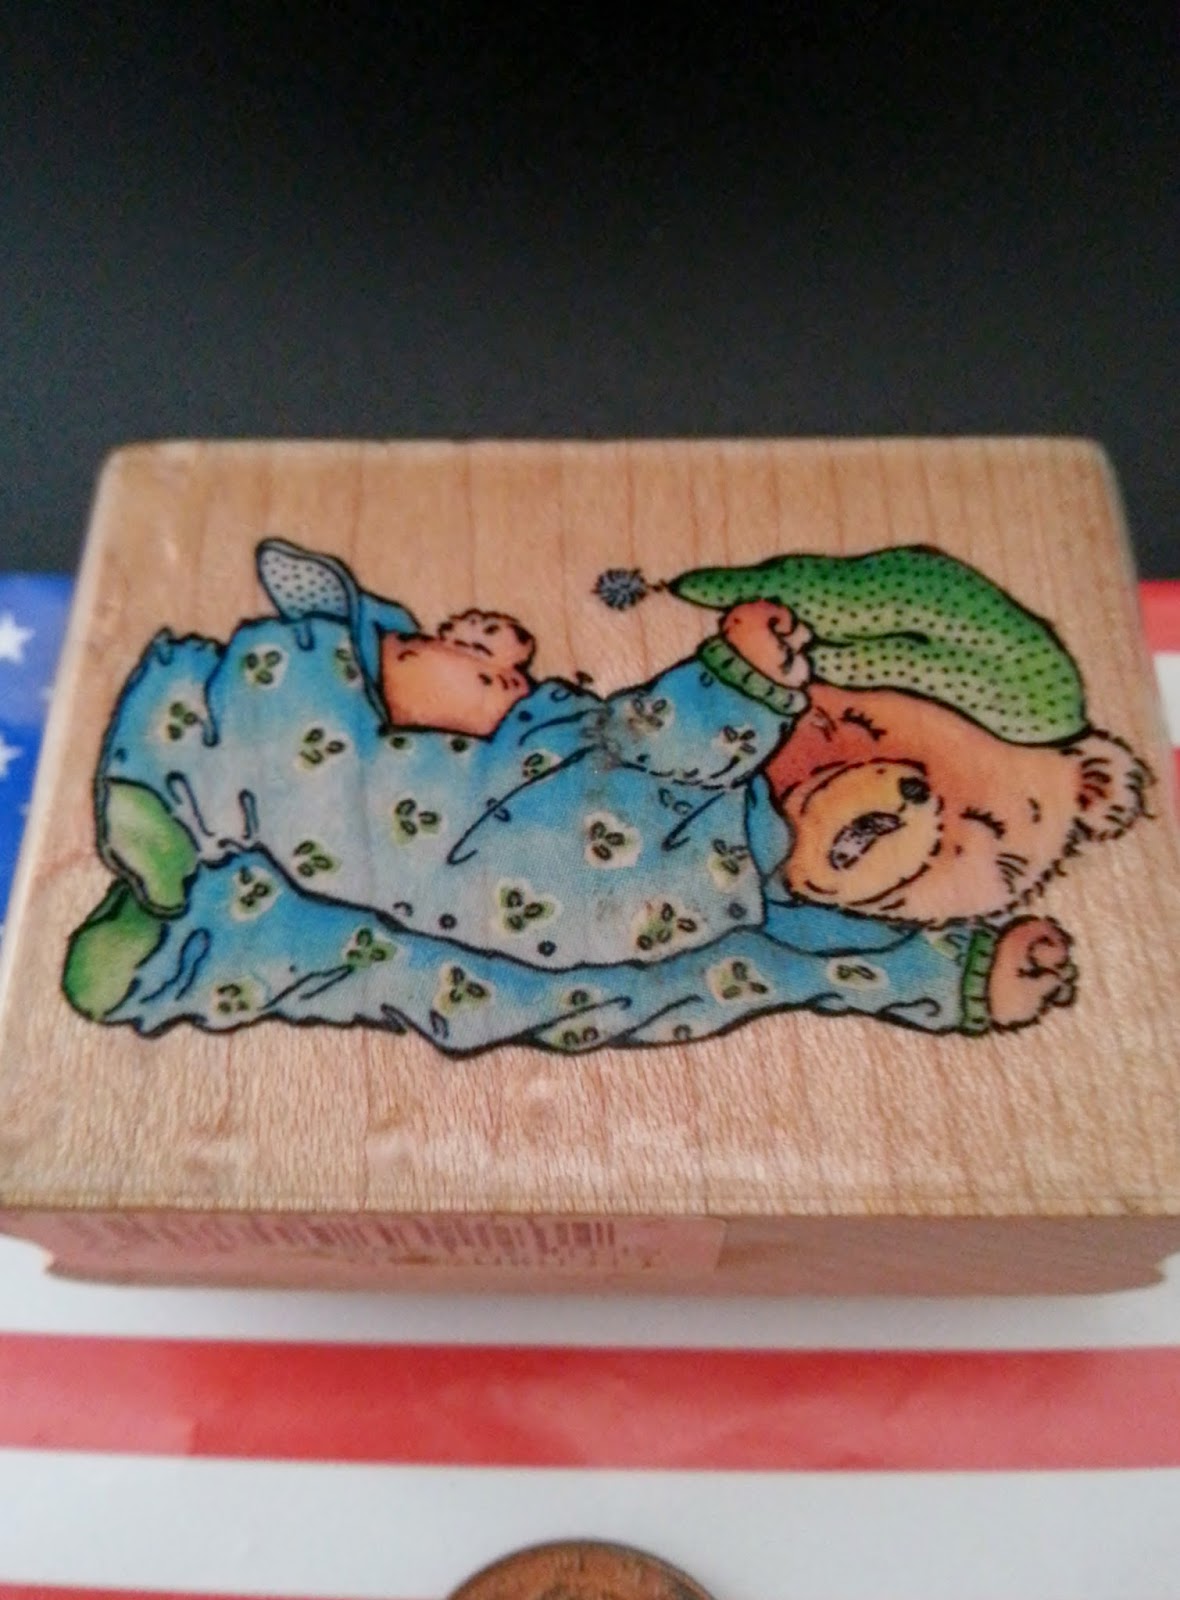 http://www.storenvy.com/products/11596985-bedtime-bear-a781d-wood-mount-rubber-stamp-stampede-rubber